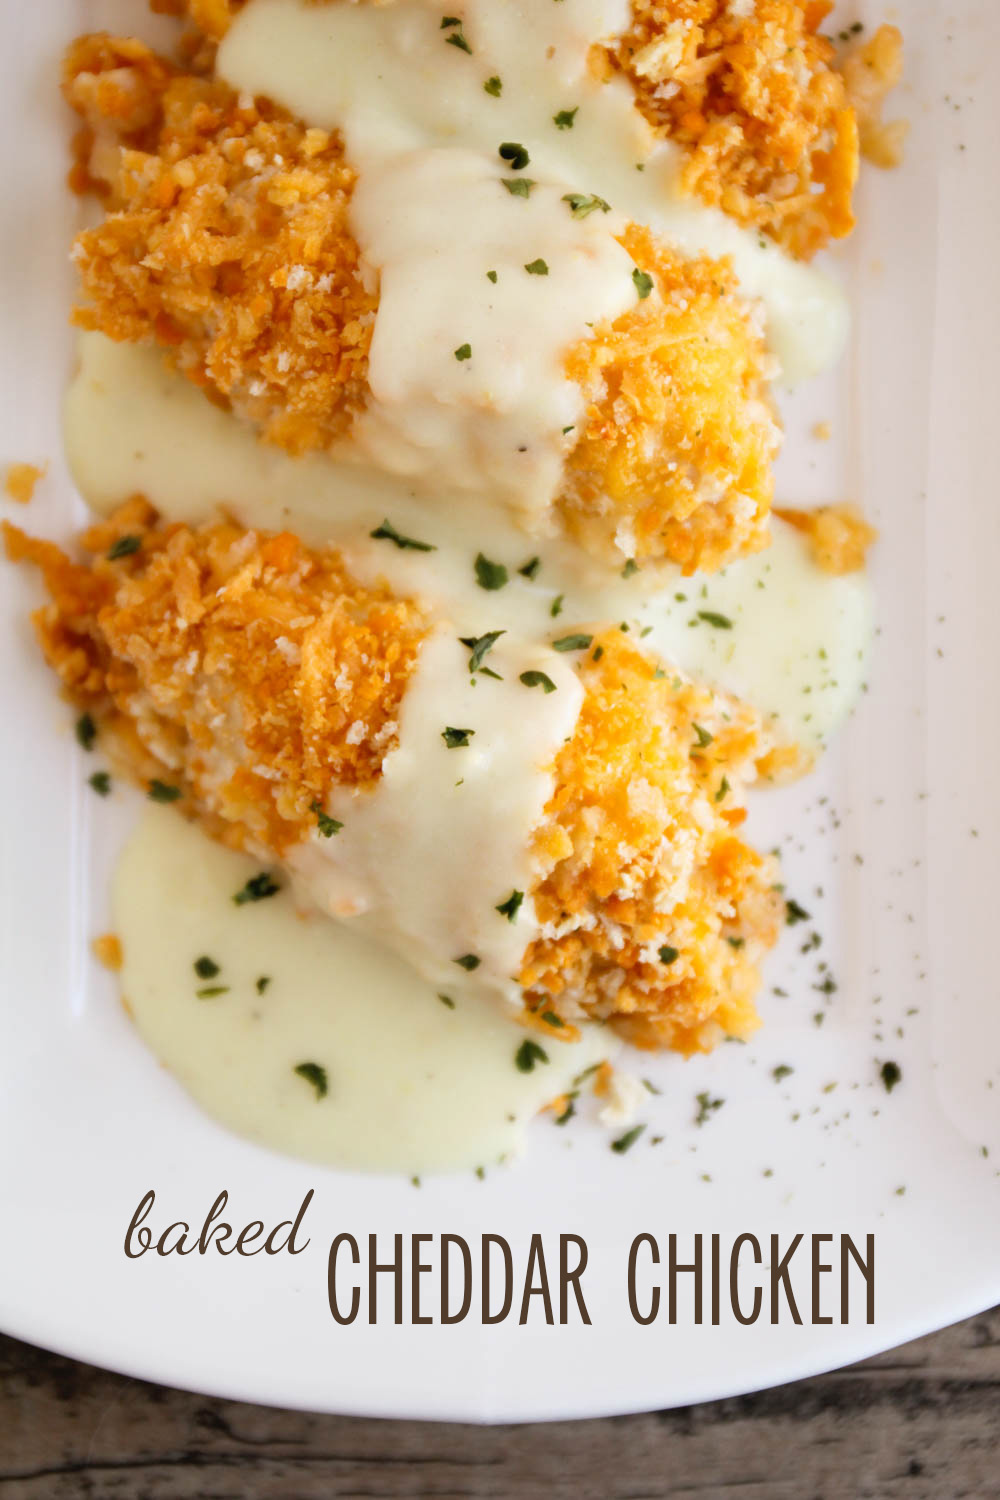 This baked cheddar chicken is so flavorful and delicious. A quick and easy recipe that will be a new family favorite!